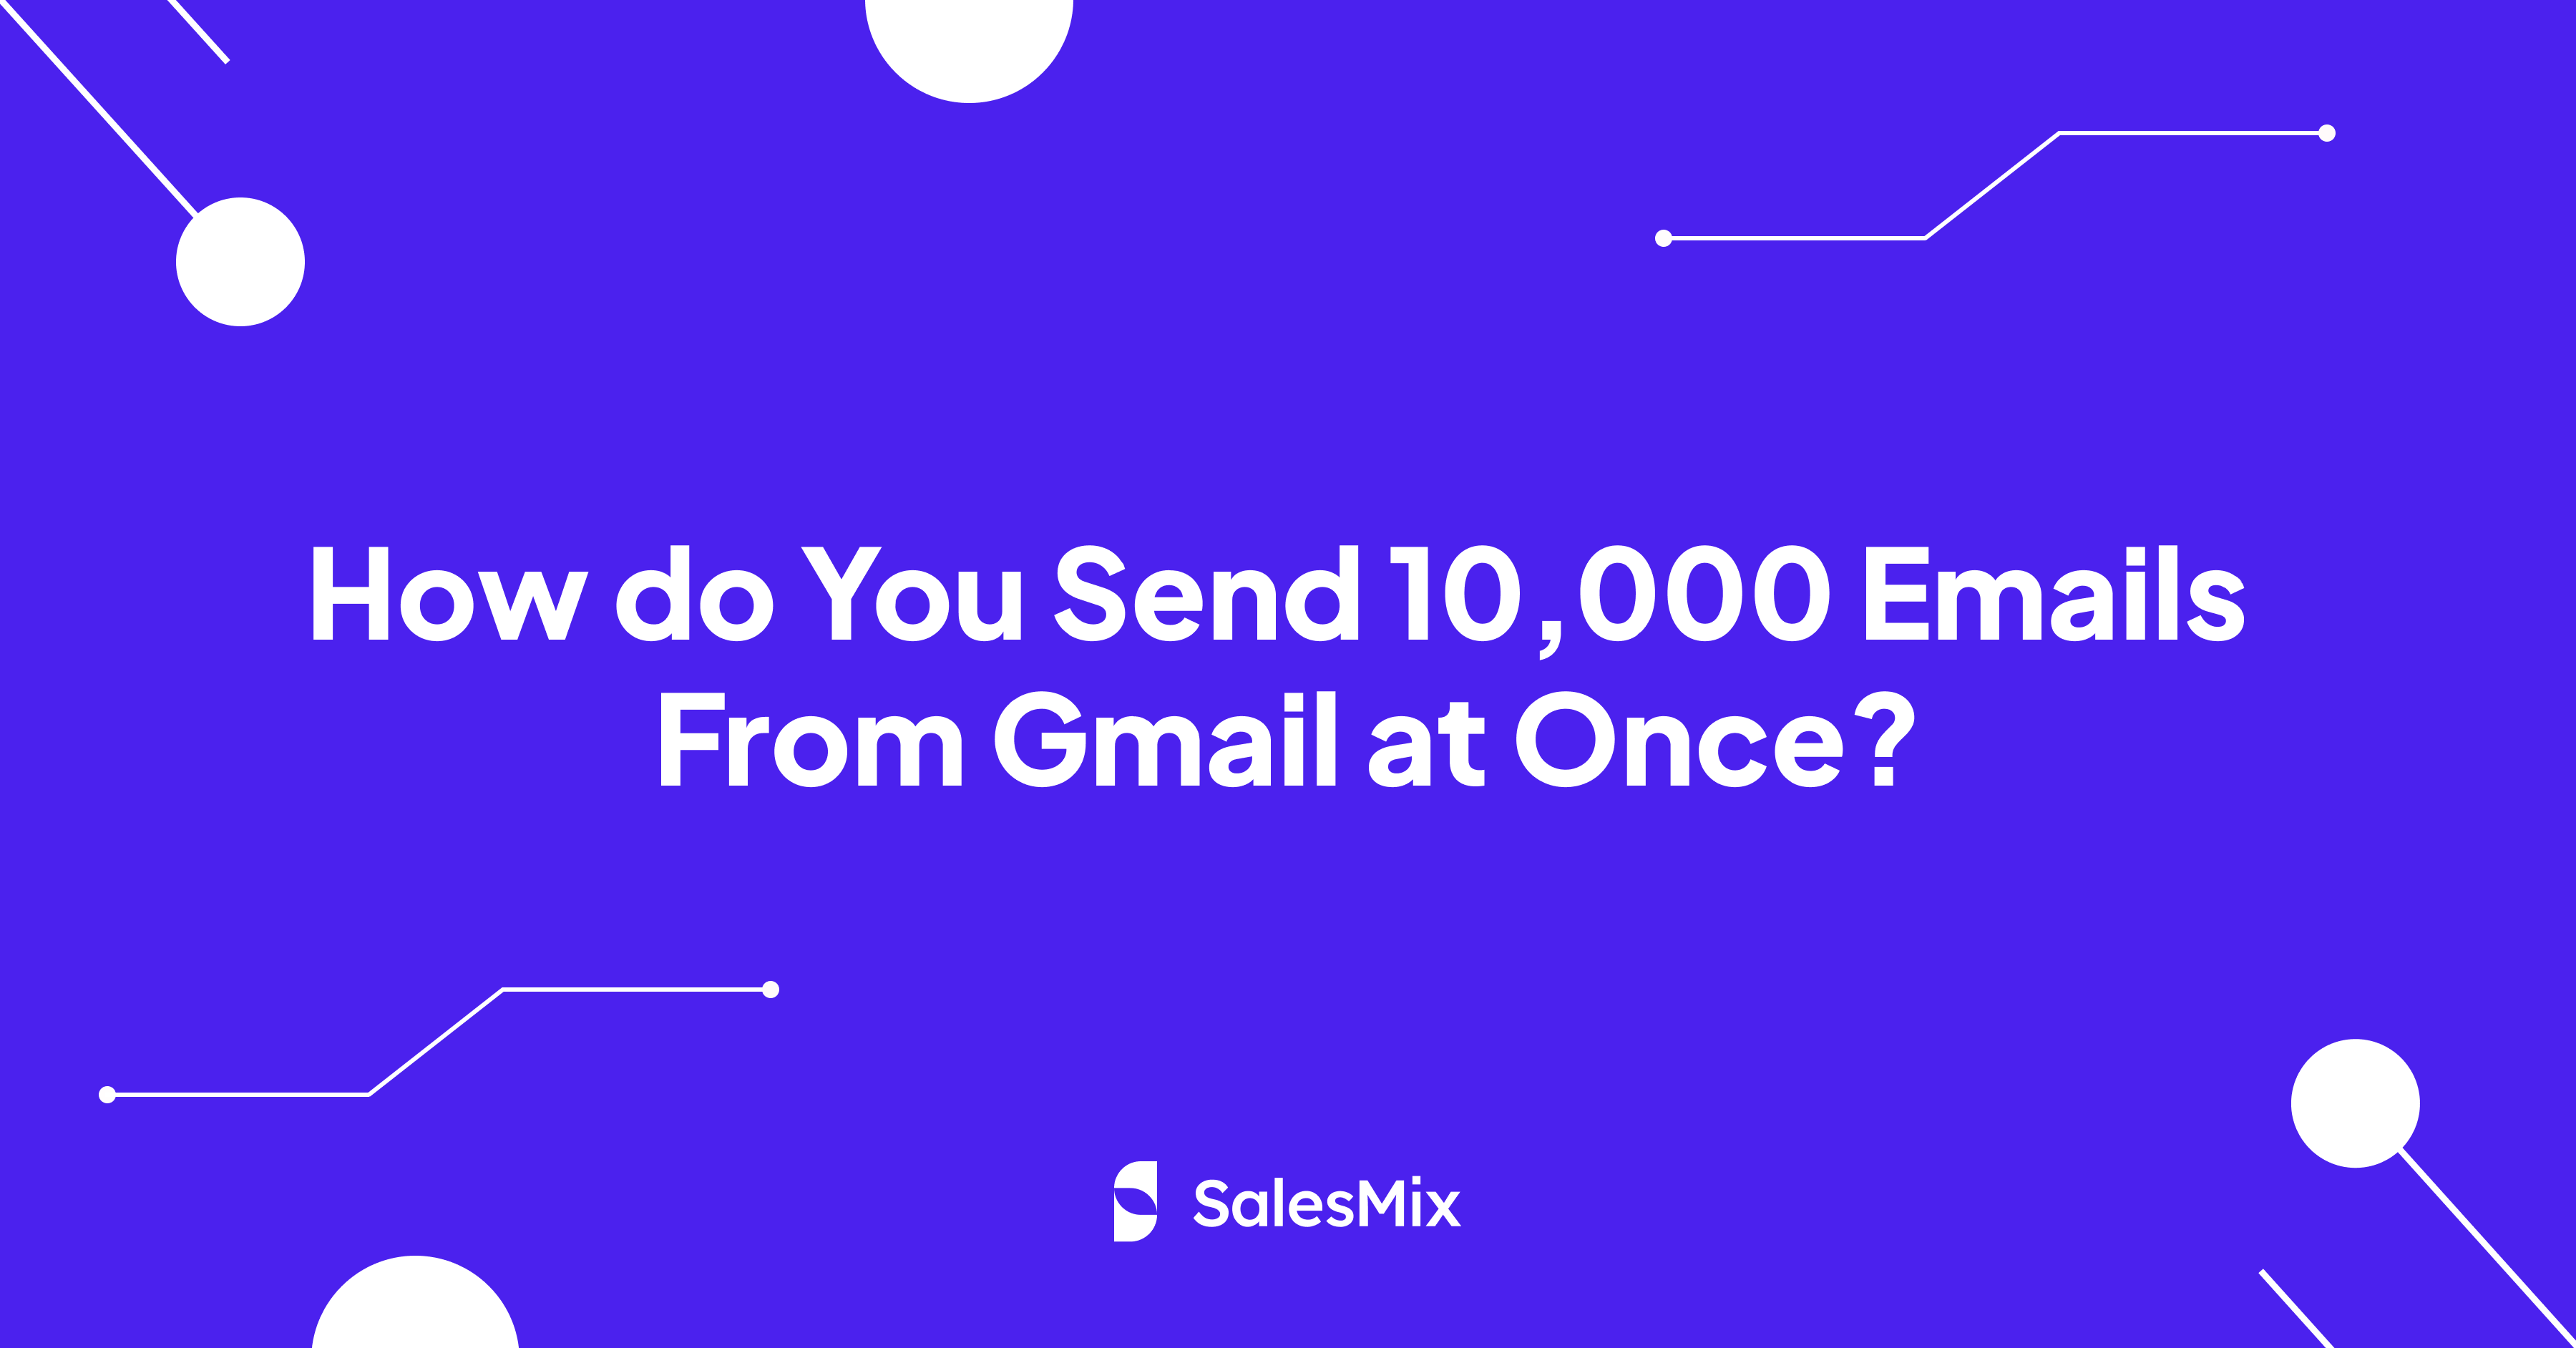 Send 10000 emails from gmail featured image